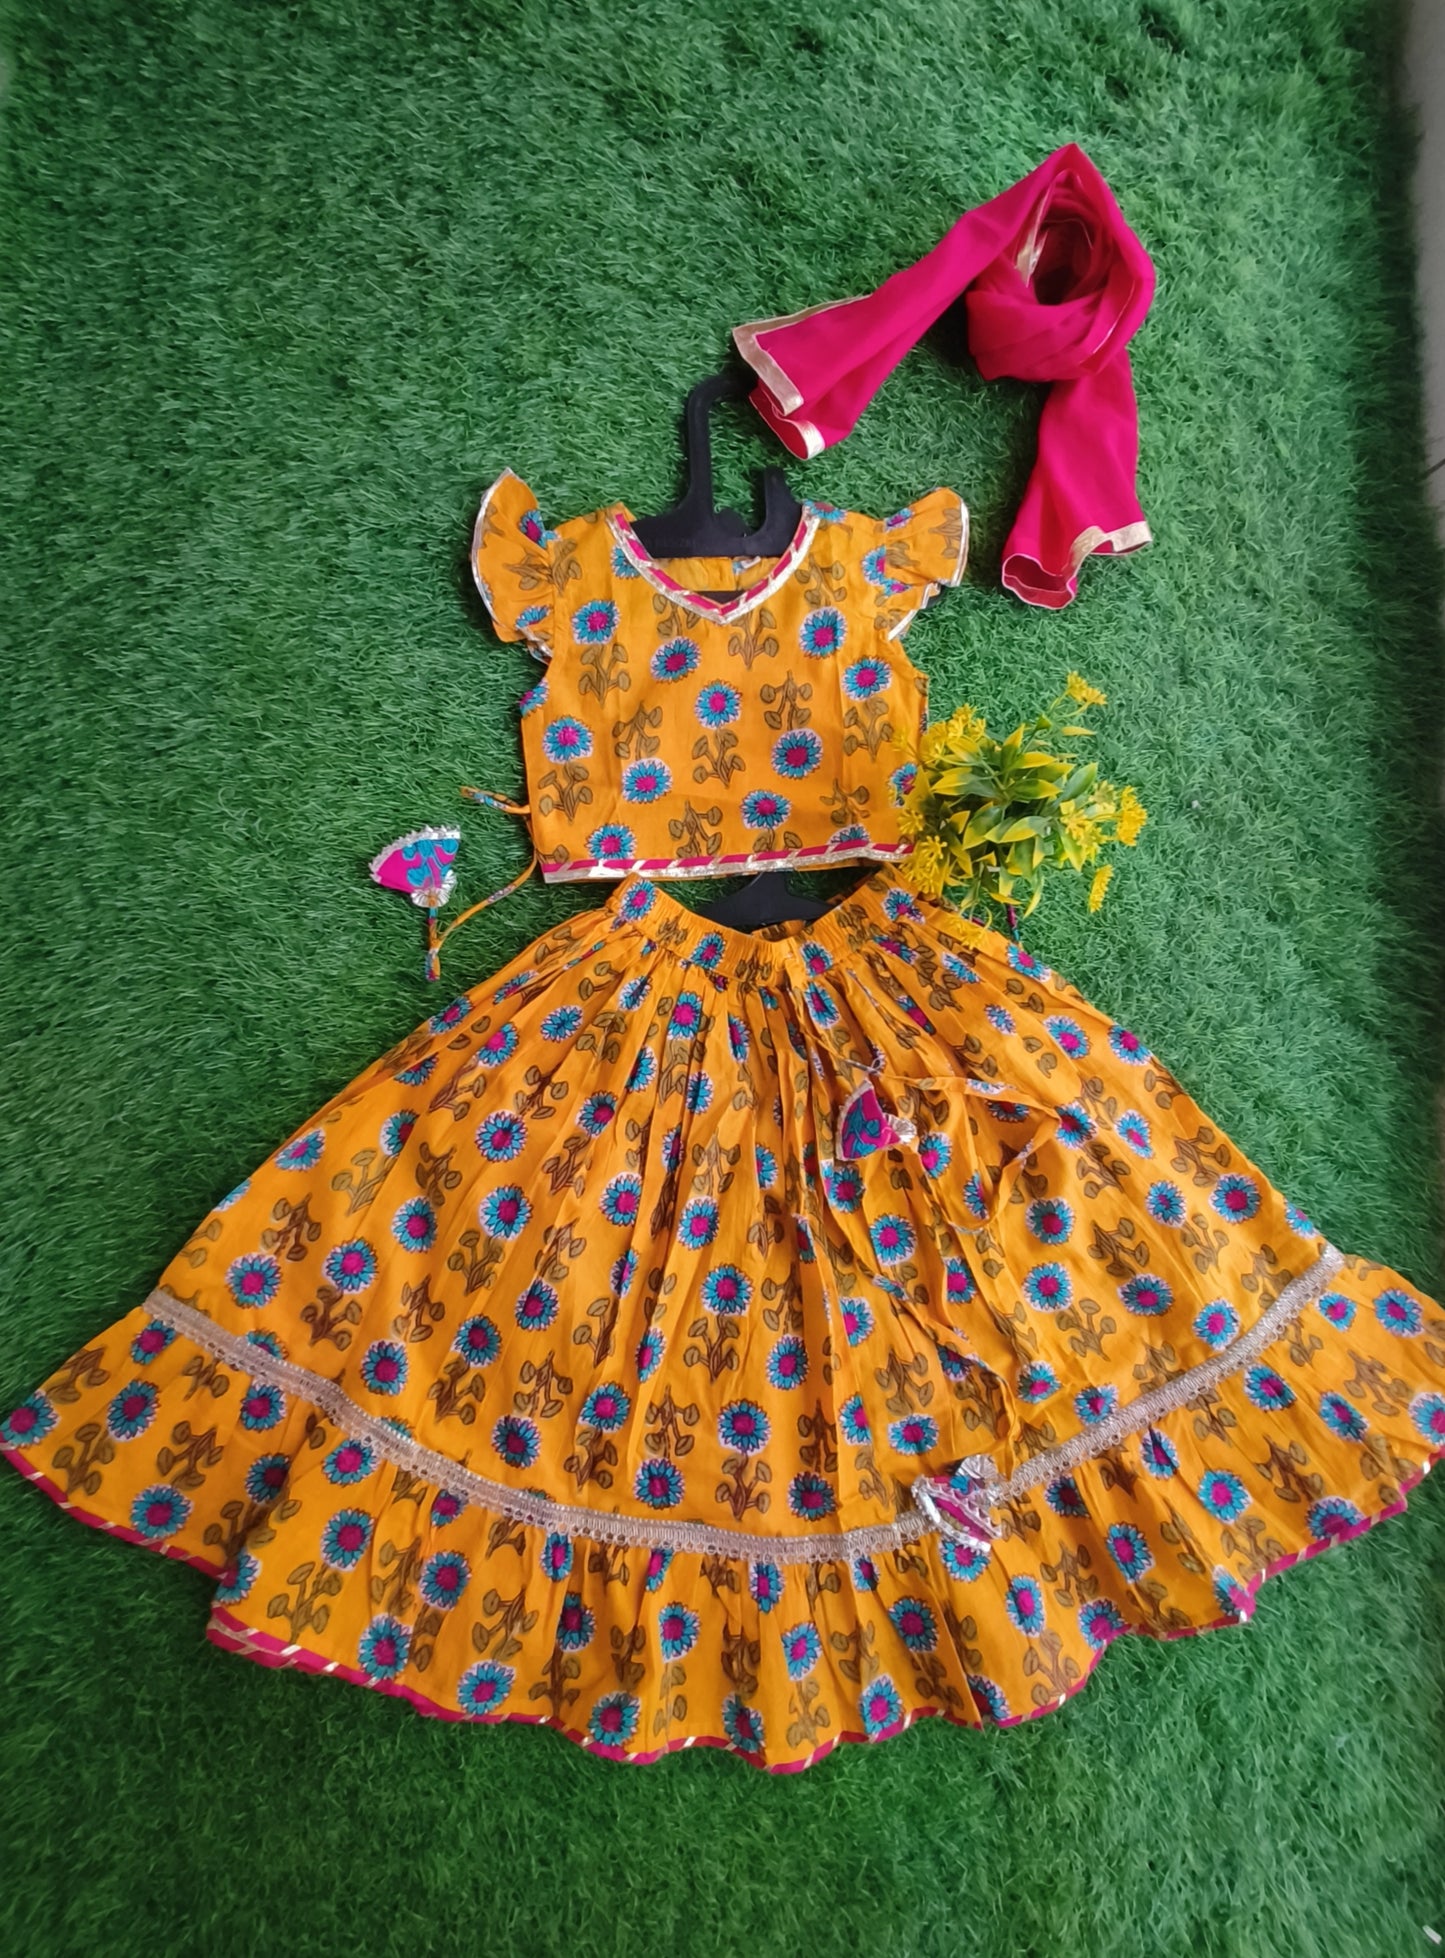 Antique Yellow Flower Printed Kurti and Lehenga Outfit with Pink Dupatta for Girl